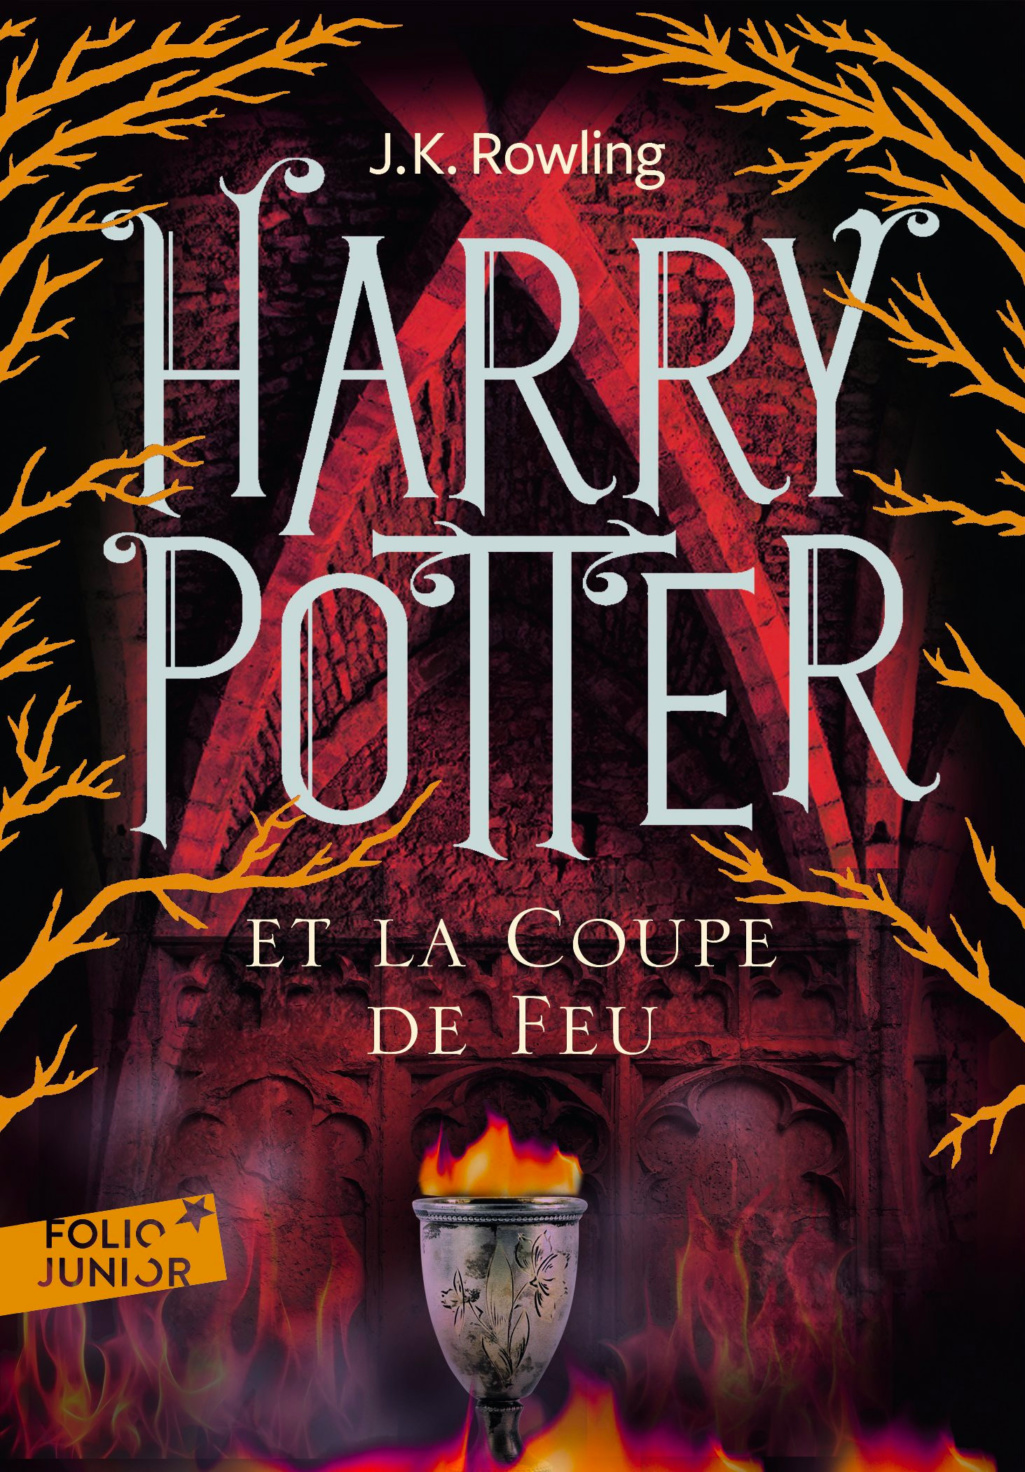 download the new version for ios Harry Potter and the Goblet of Fire